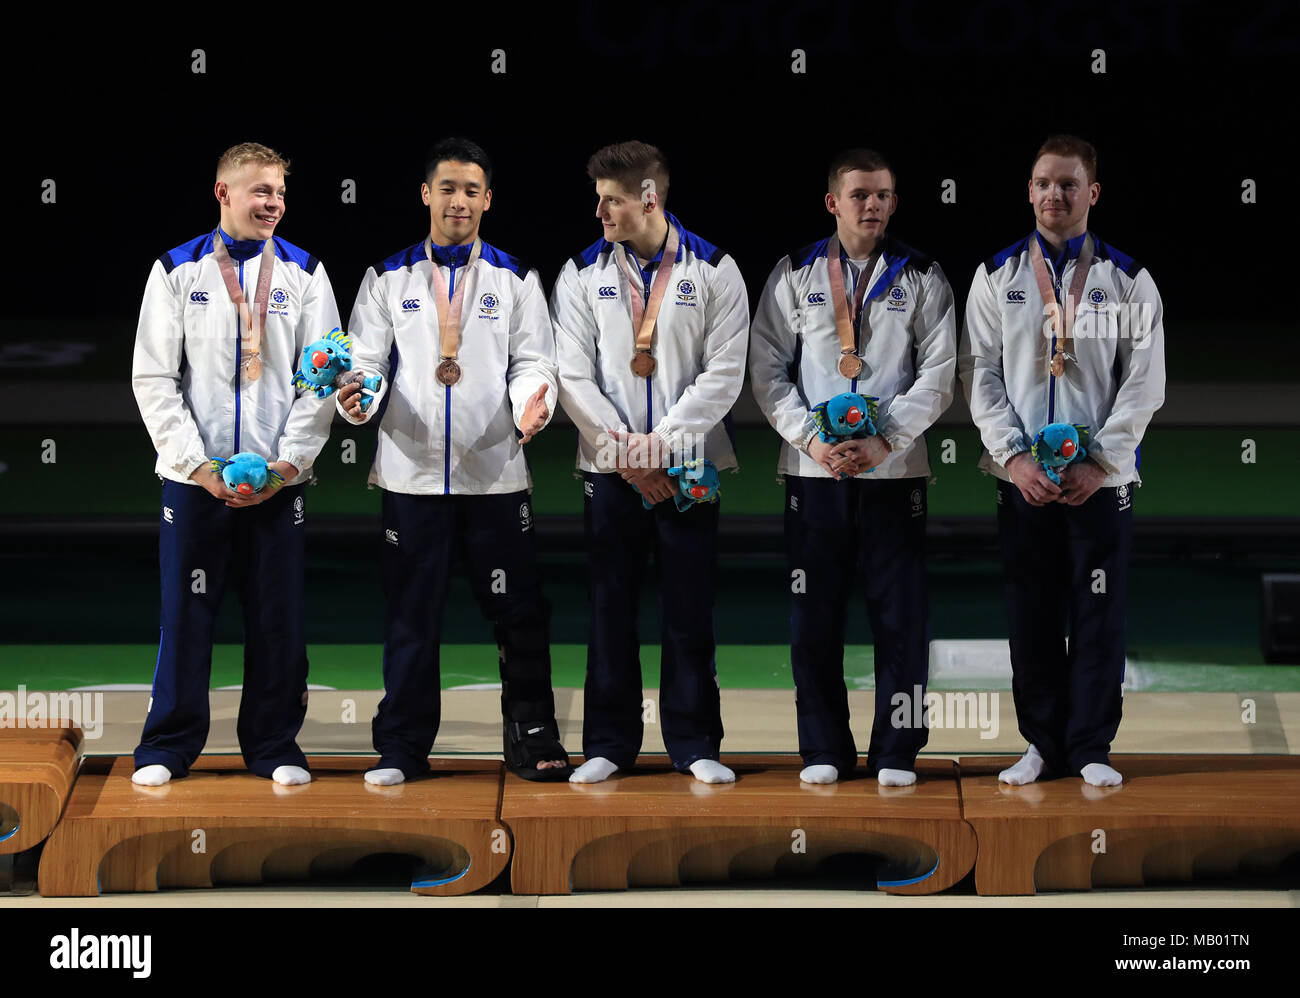 necesar servi Admis  Scotland's gymnasts including Daniel Purvis, Kelvin Cham, Hamish Carter,  Frank Baines and David Weir with their bronze medals following the final of  the Men's Team event at the Coomera Indoor sports Centre